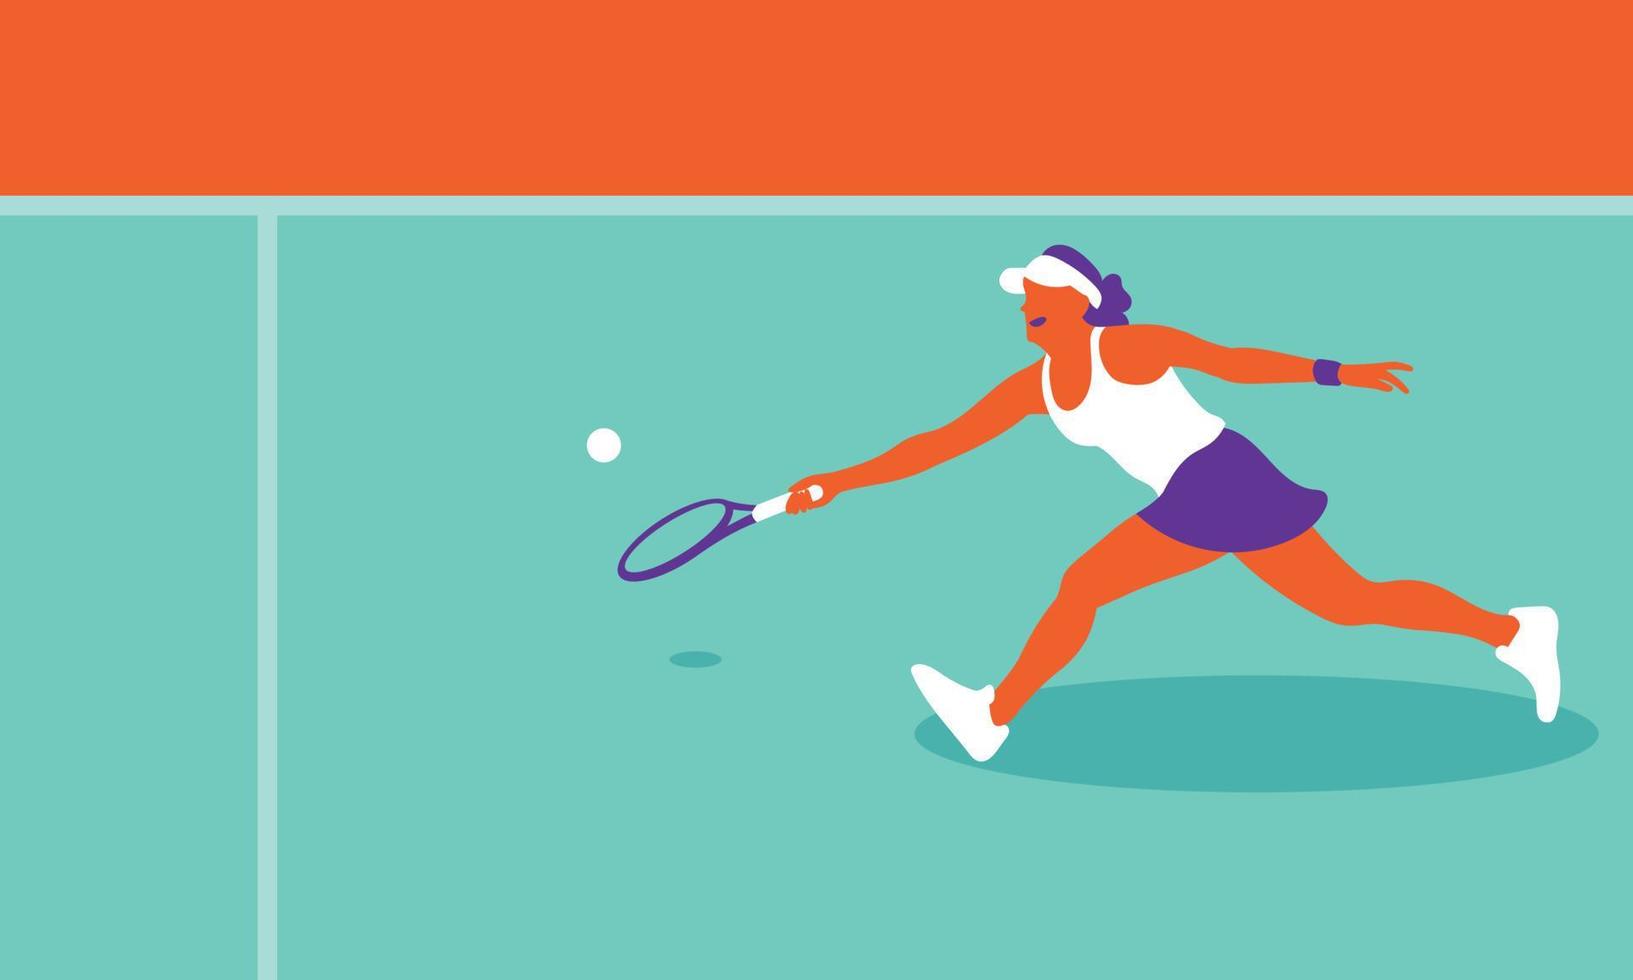 Young woman playing tennis on court vector